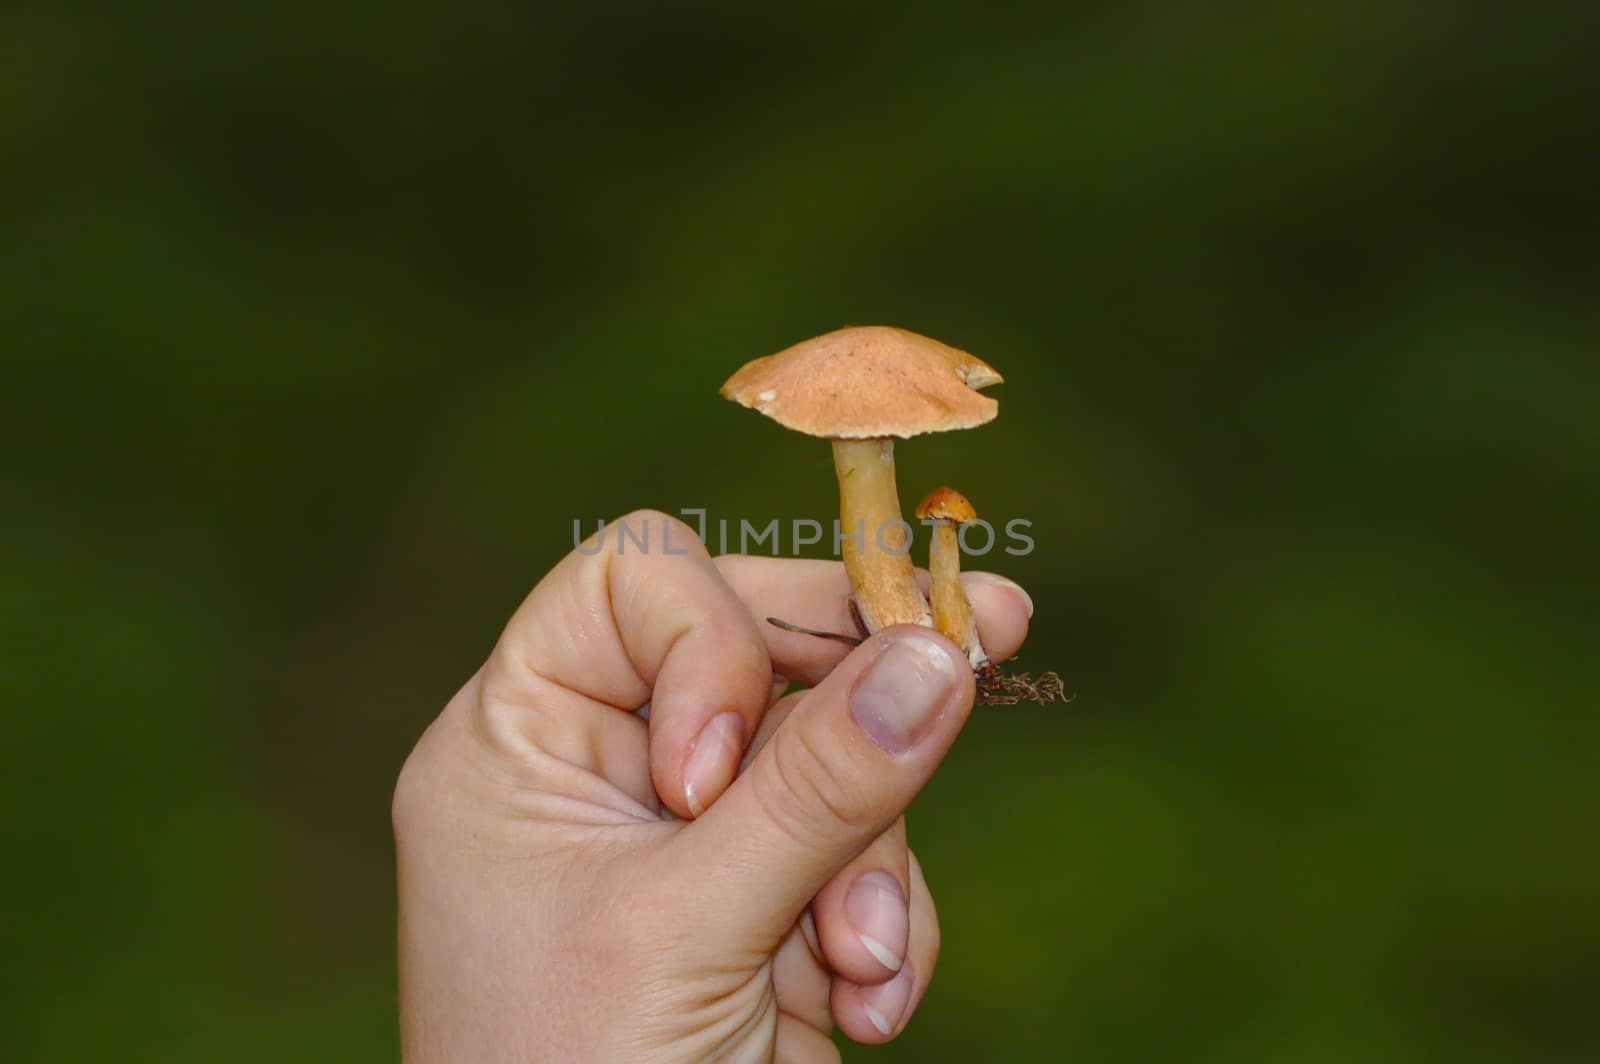 Holding two small tasty looking mushrooms in hand, trying to decide are those safe to eat or not. Hand and mushrooms isolated from dark green background.